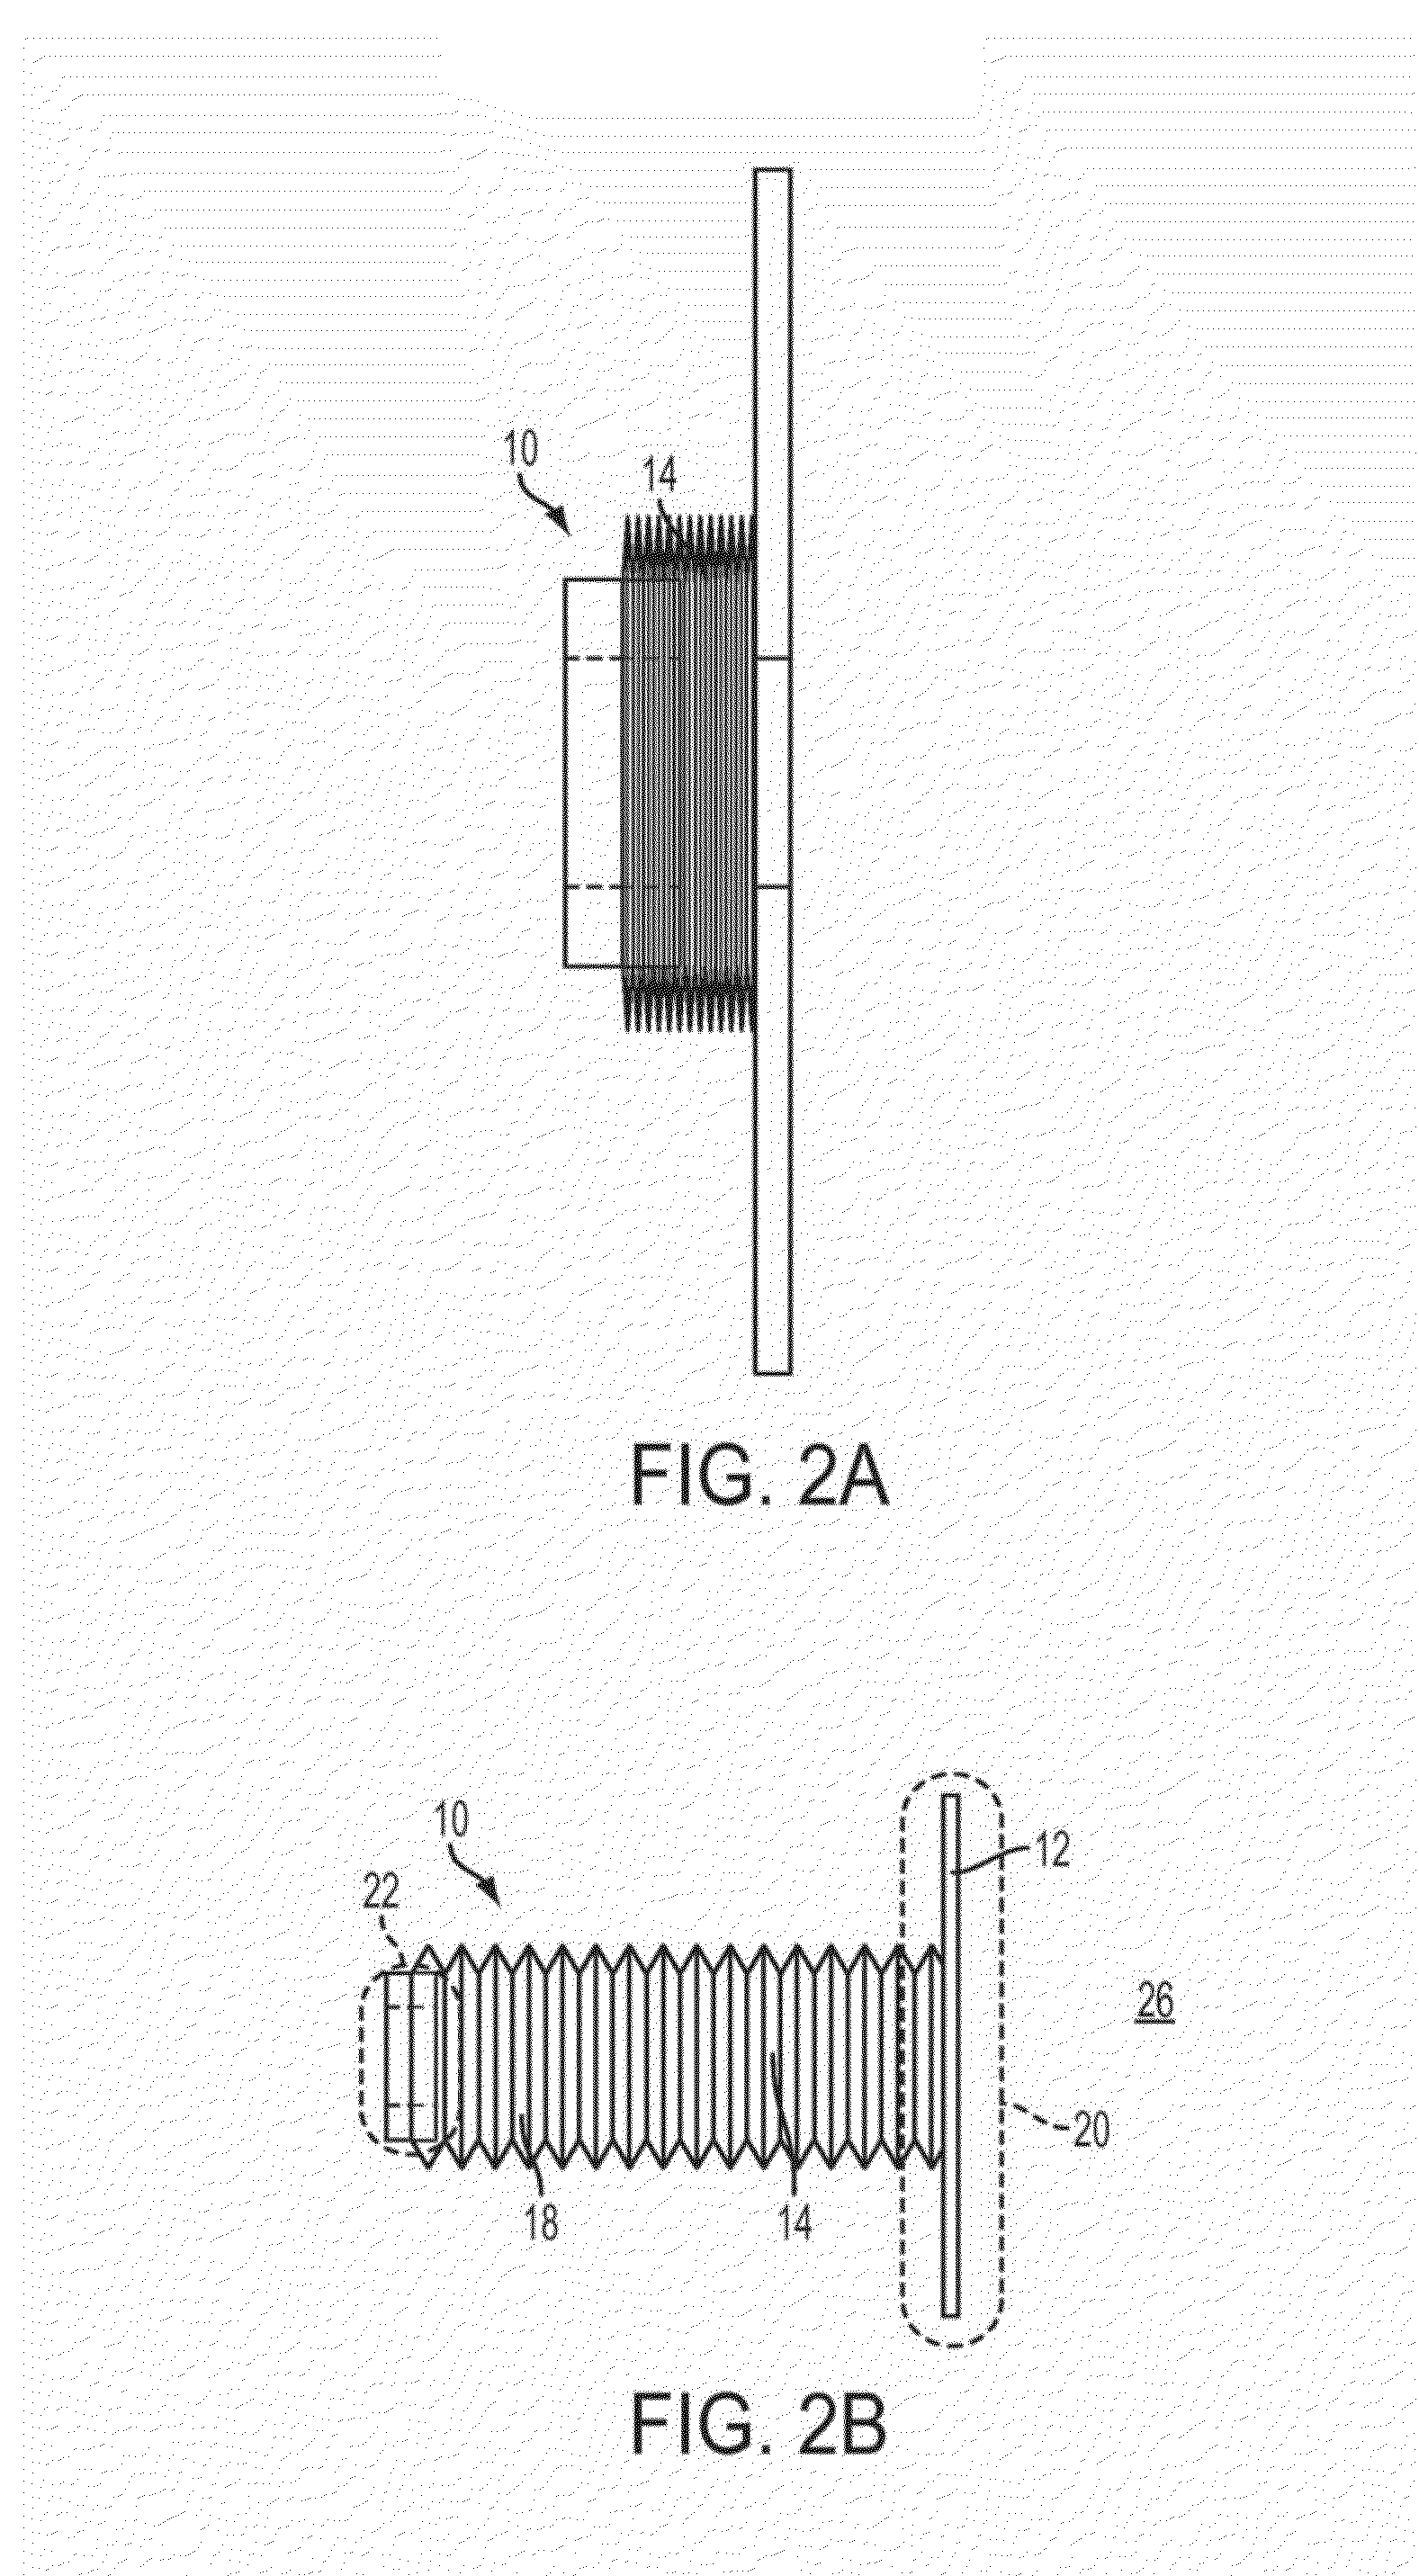 Catheter Extension With Integrated Circumferentially Sealing Securement Dressing